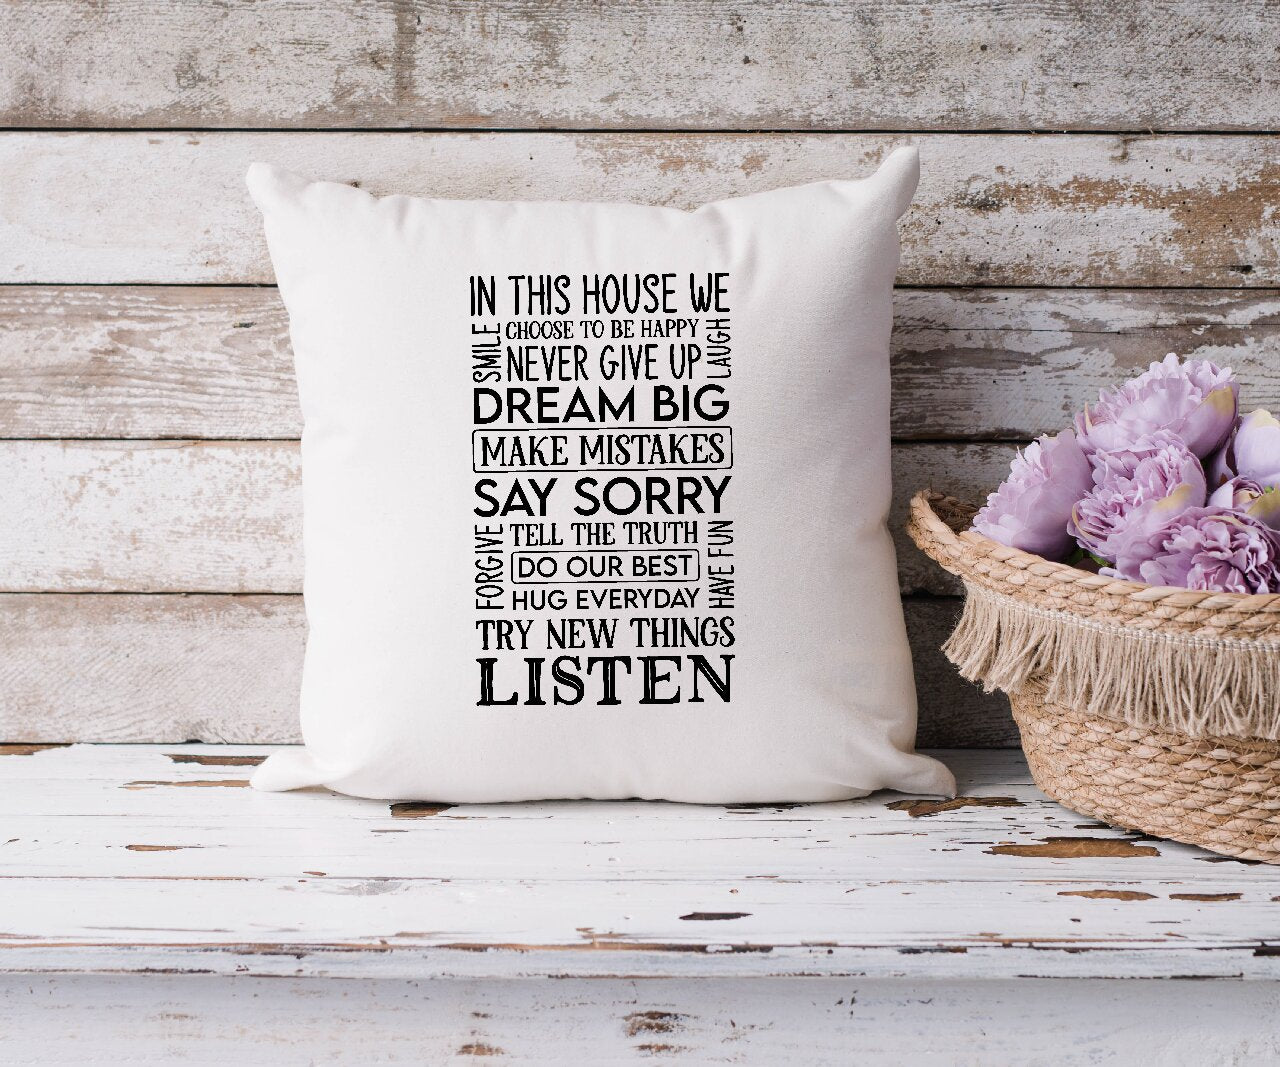 In This House We..... - Cushion Cover